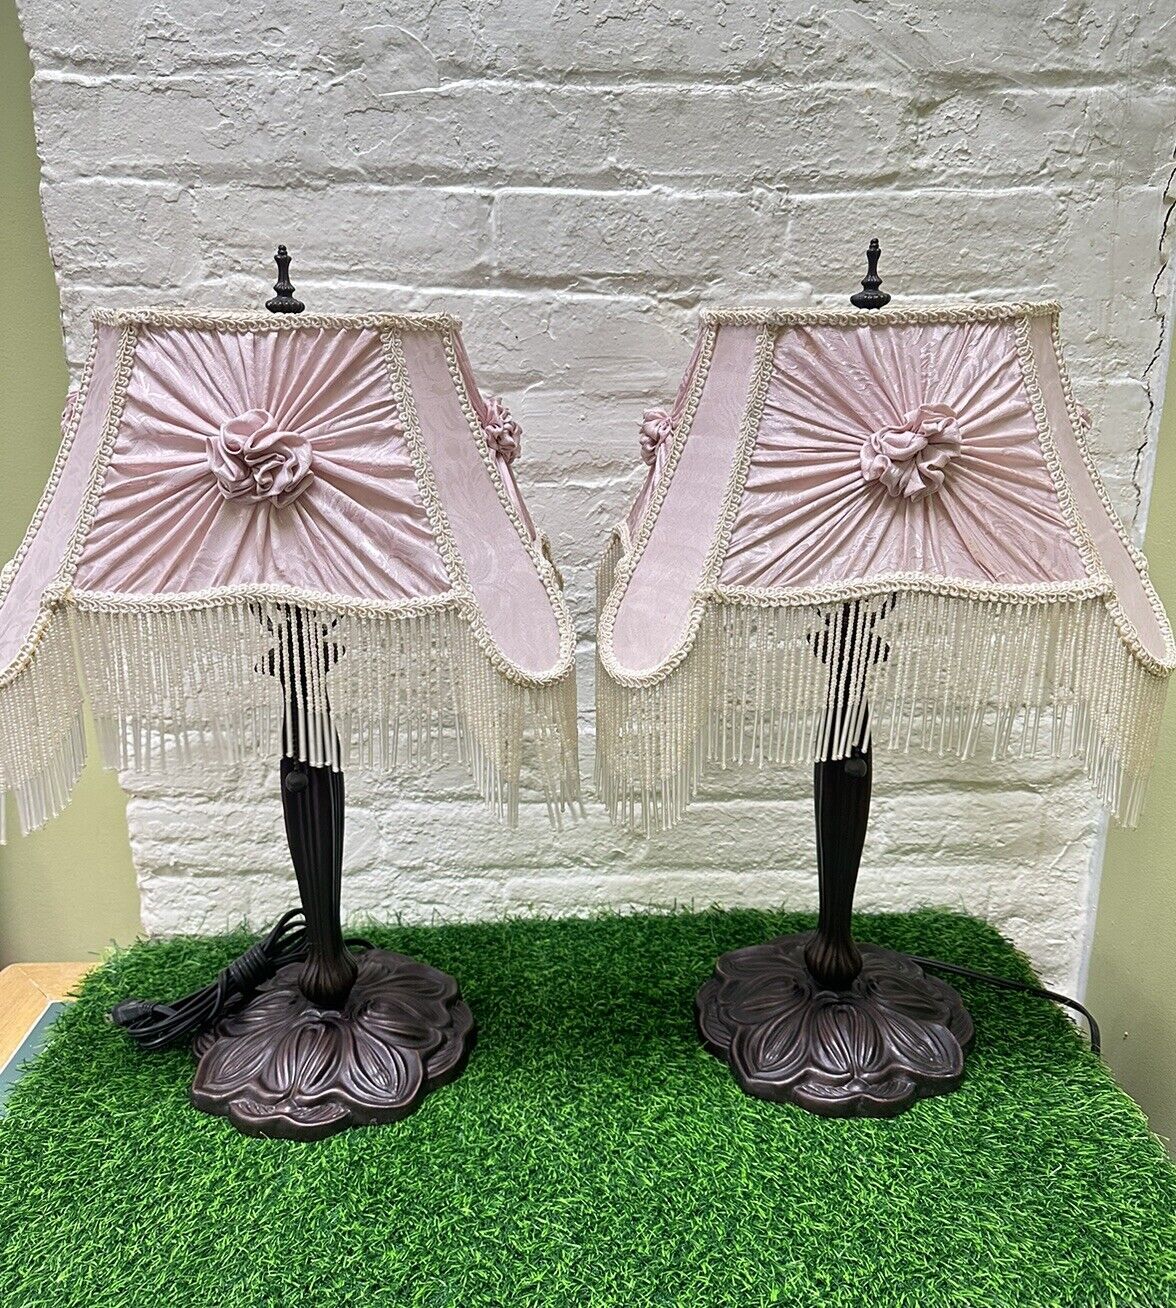 2 TIFFANY Style Pink Satin Beaded Fringe Victorian Shabby Chic Table Lamps Lamp